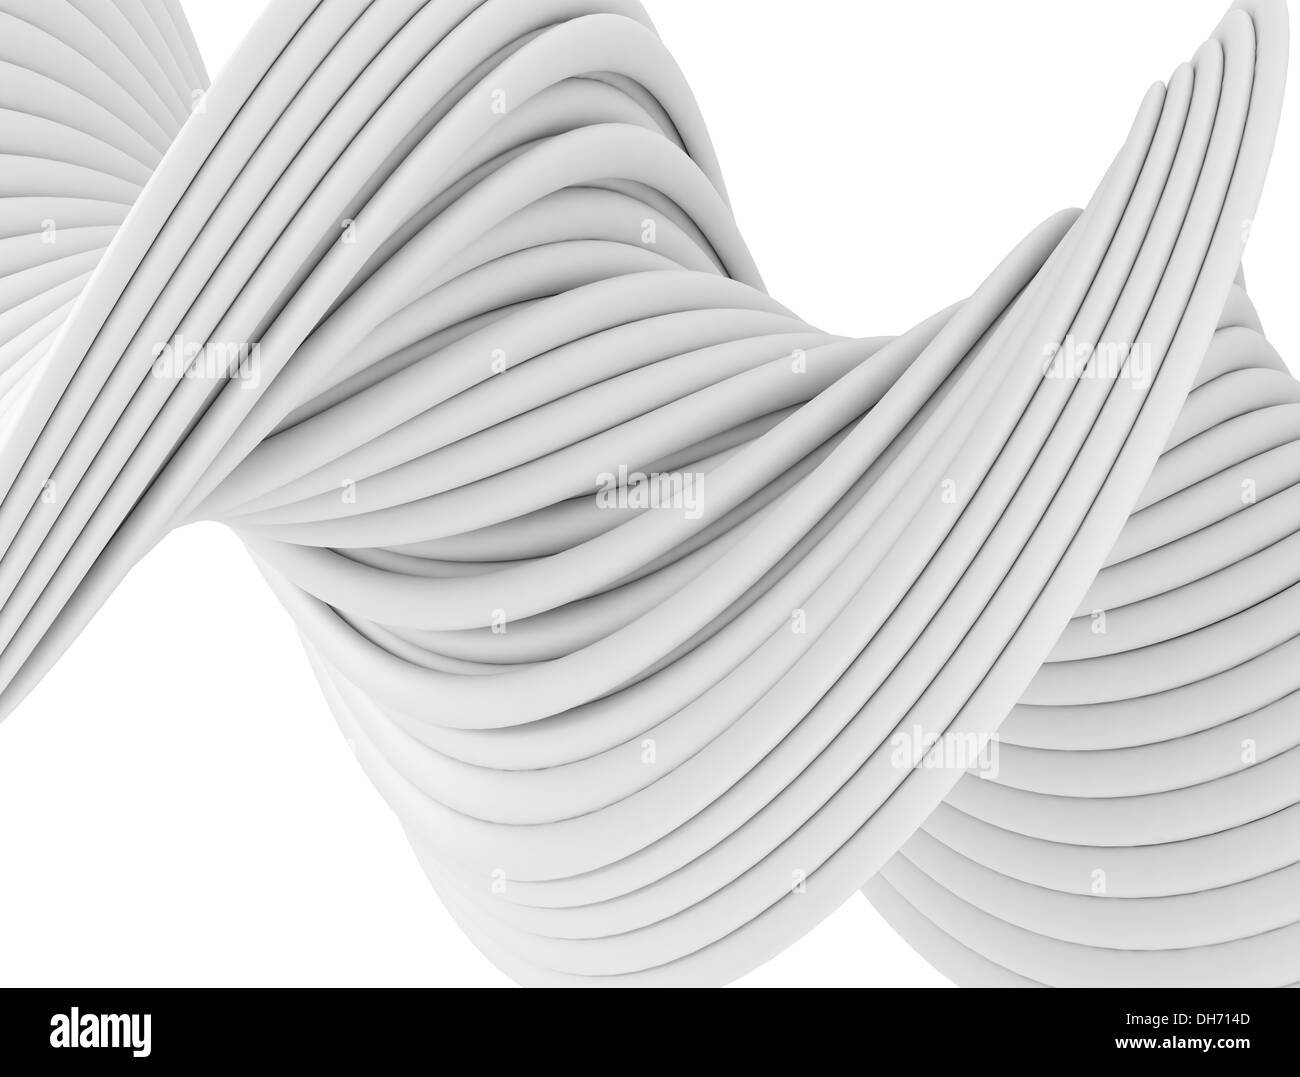 Abstract 3d wires spiral shape Stock Photo